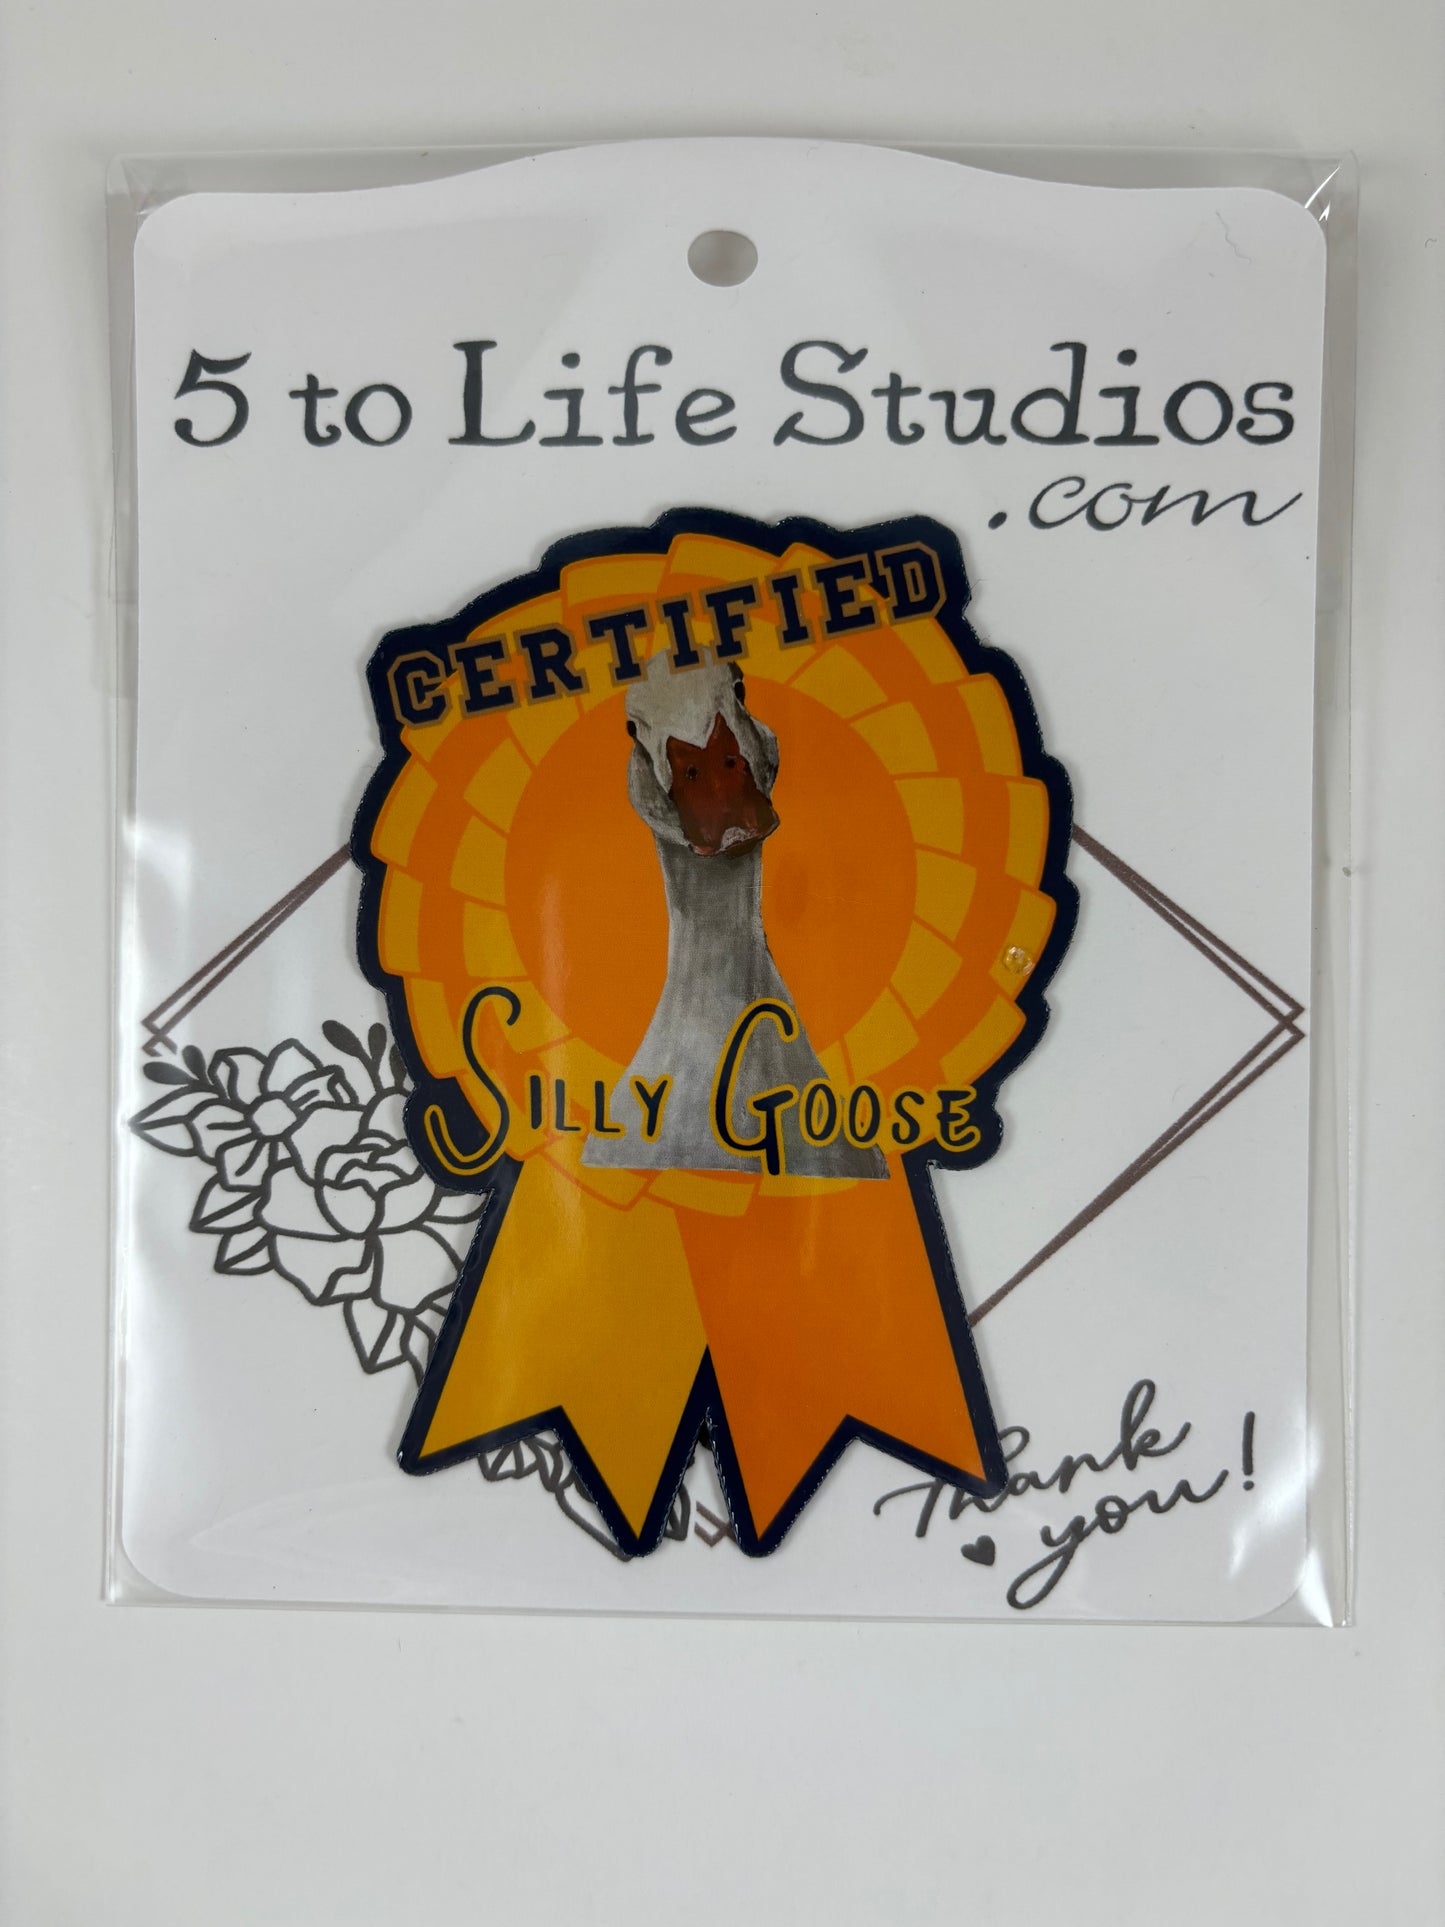 "CERTIFIED Silly Goose" (featuring Duck Duck Goose) Refrigerator Magnet